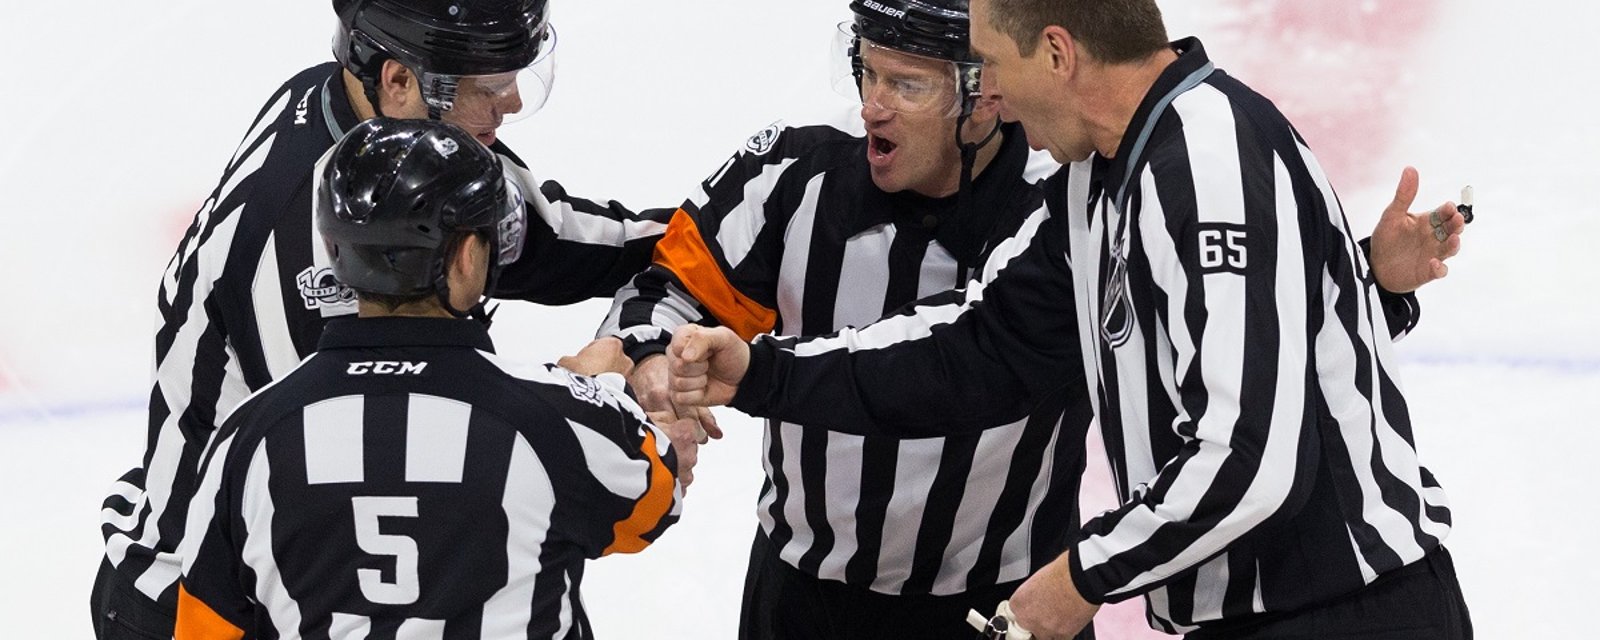 Multiple NHL head coaches call out poor officiating in the Stanley Cup Playoffs.